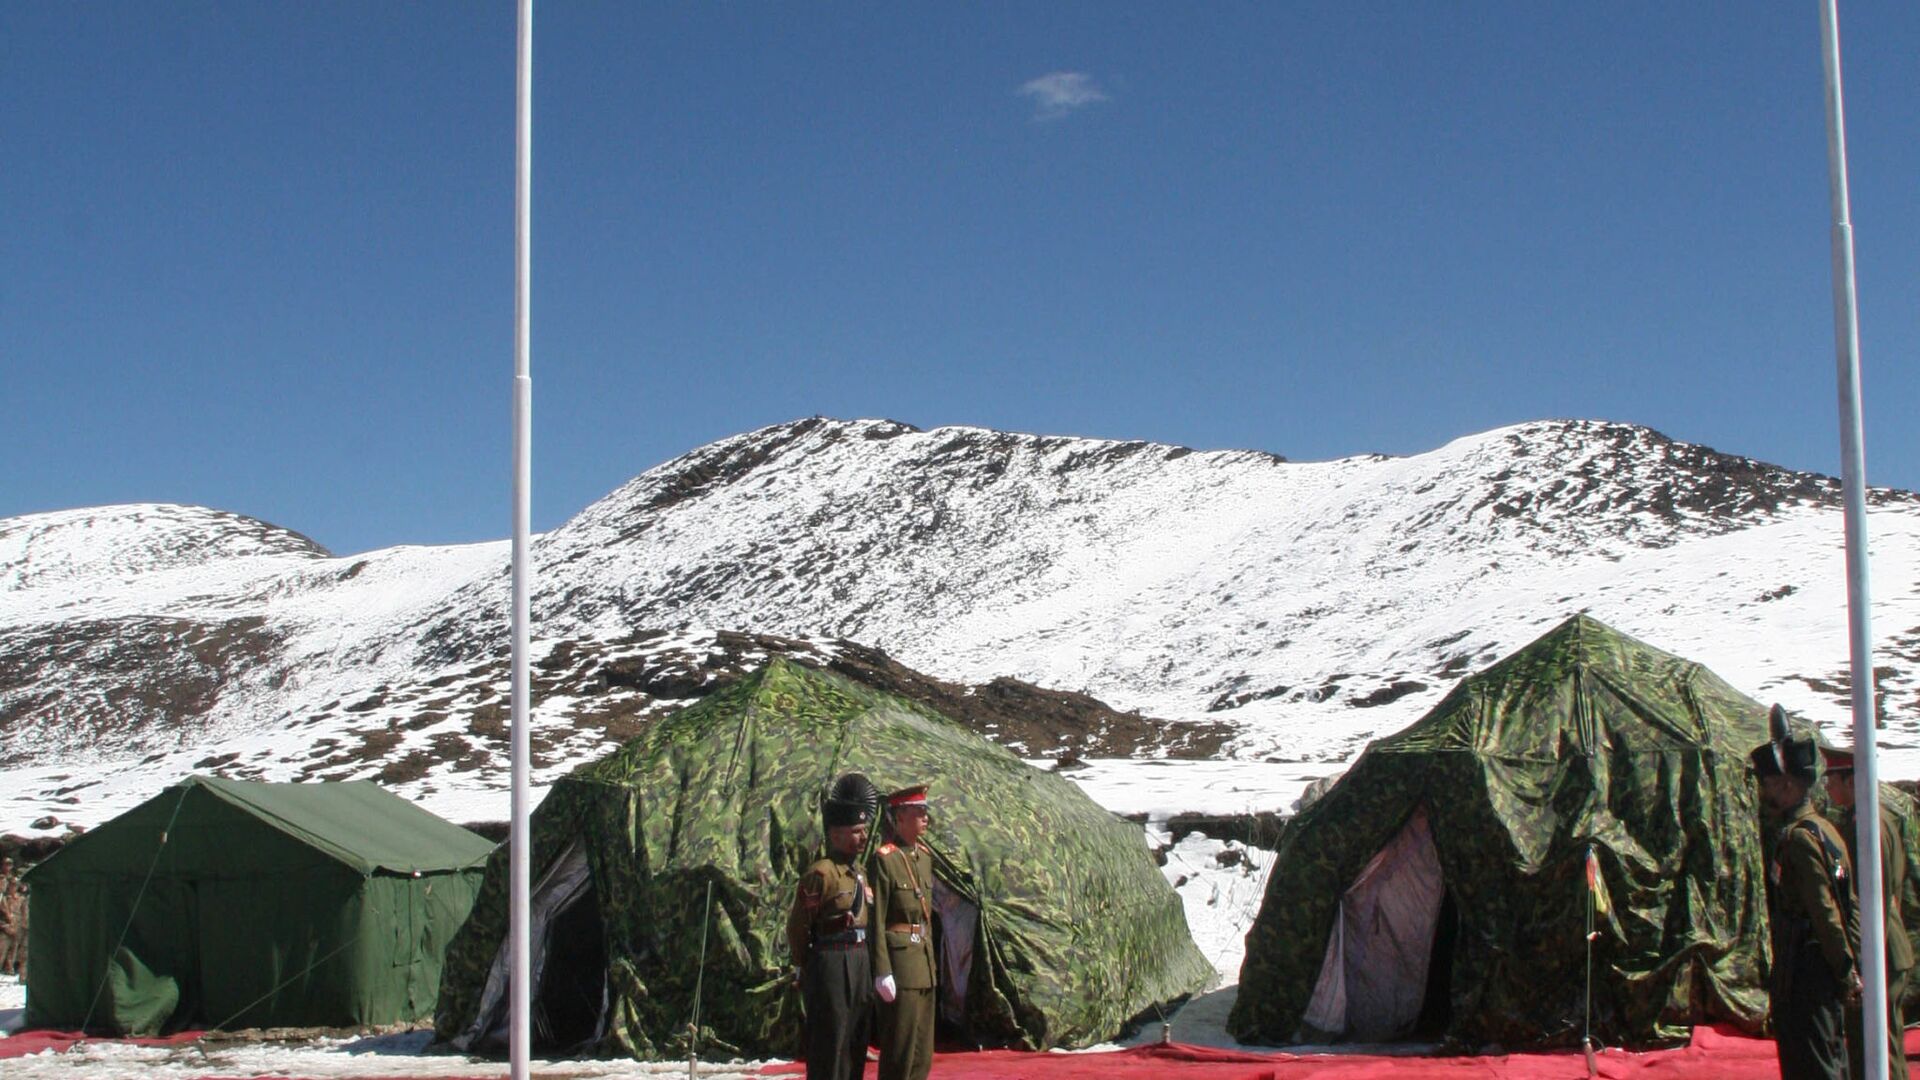 Indian and Chinese Army commanders attend the Border Personnel Meeting (BPM) inside tents on the Chinese side of the Line of Actual Control at Bumla, on the India-China Border, Monday, Oct. 30, 2006 - Sputnik International, 1920, 26.02.2021